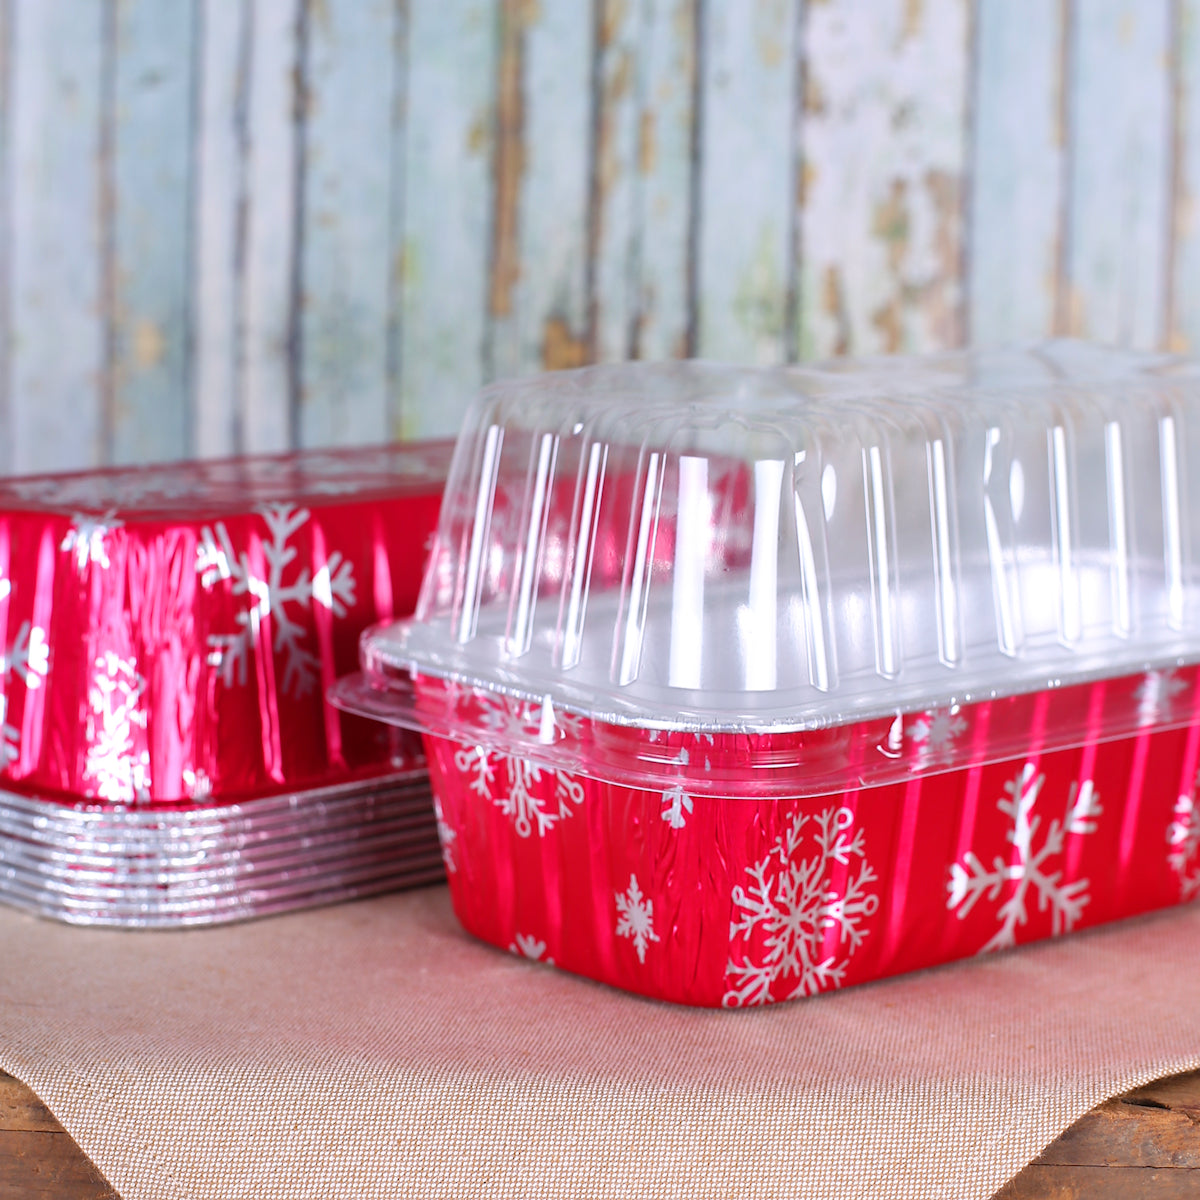 Shop Christmas Loaf Pan Kit: Christmas Bread Loaf Pans with Lids